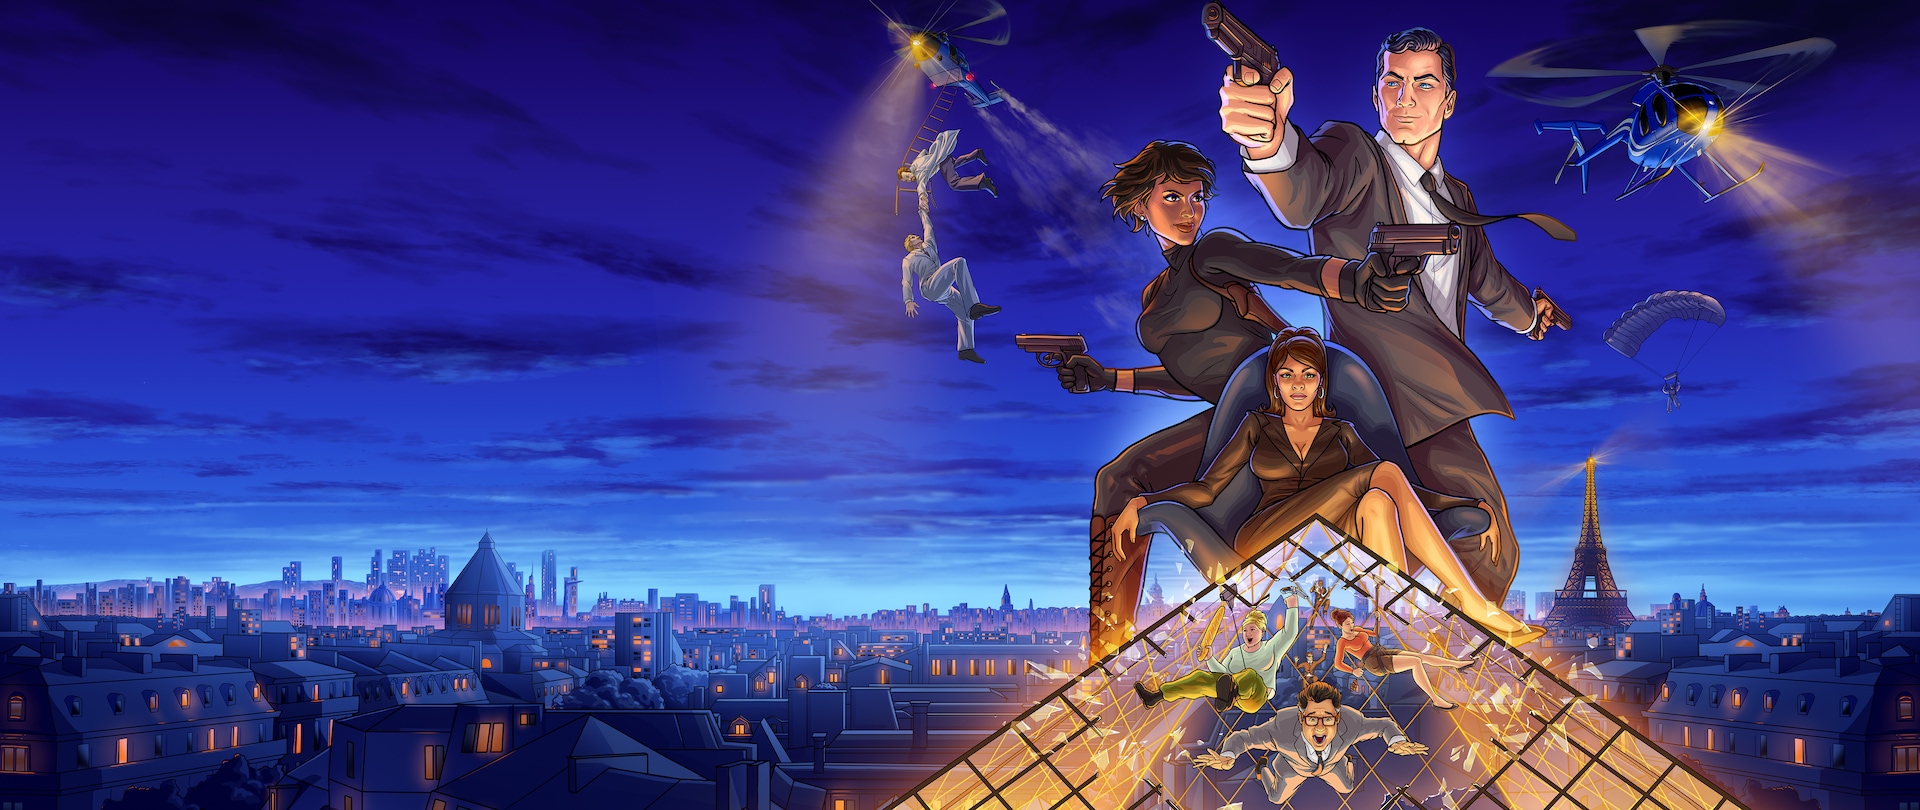 Archer and Zara centered above Lana, Pam, Cheryl and Cyrill on top of the Louvre with Paris skyline in the background